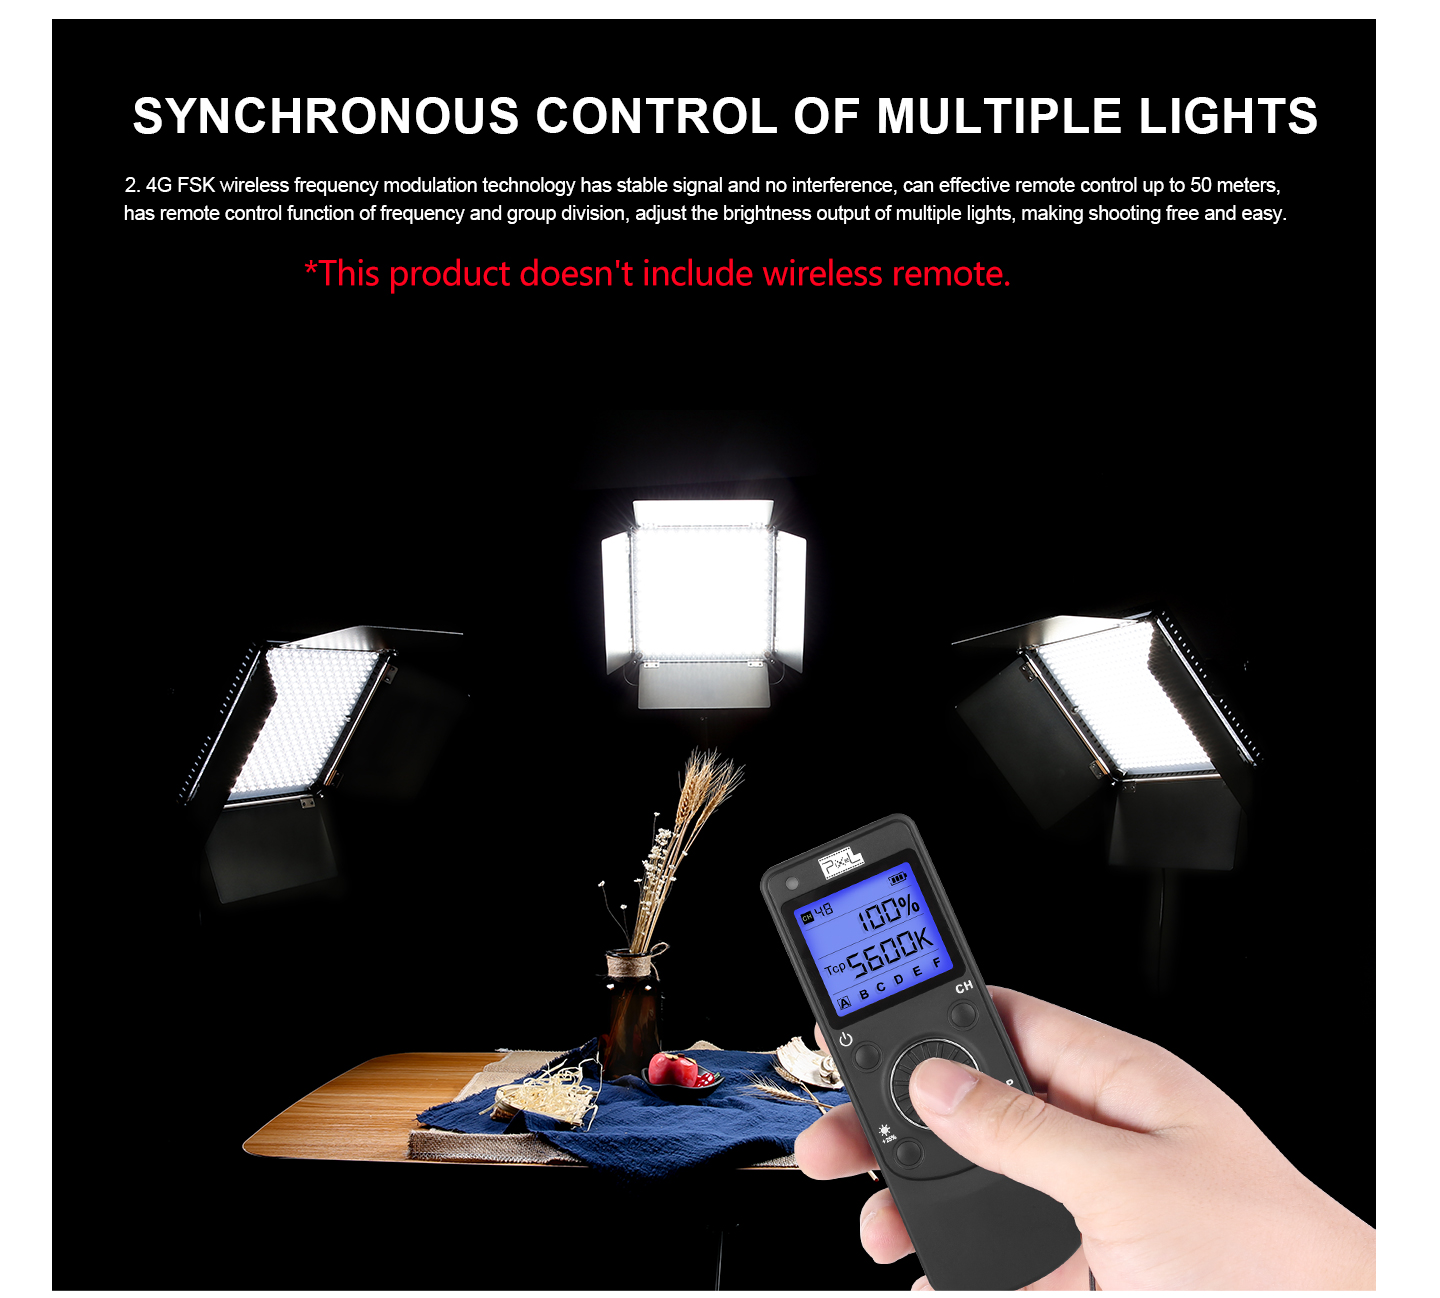 SYNCHRONOUS CONTROL OF MULTIPLE LIGHTS